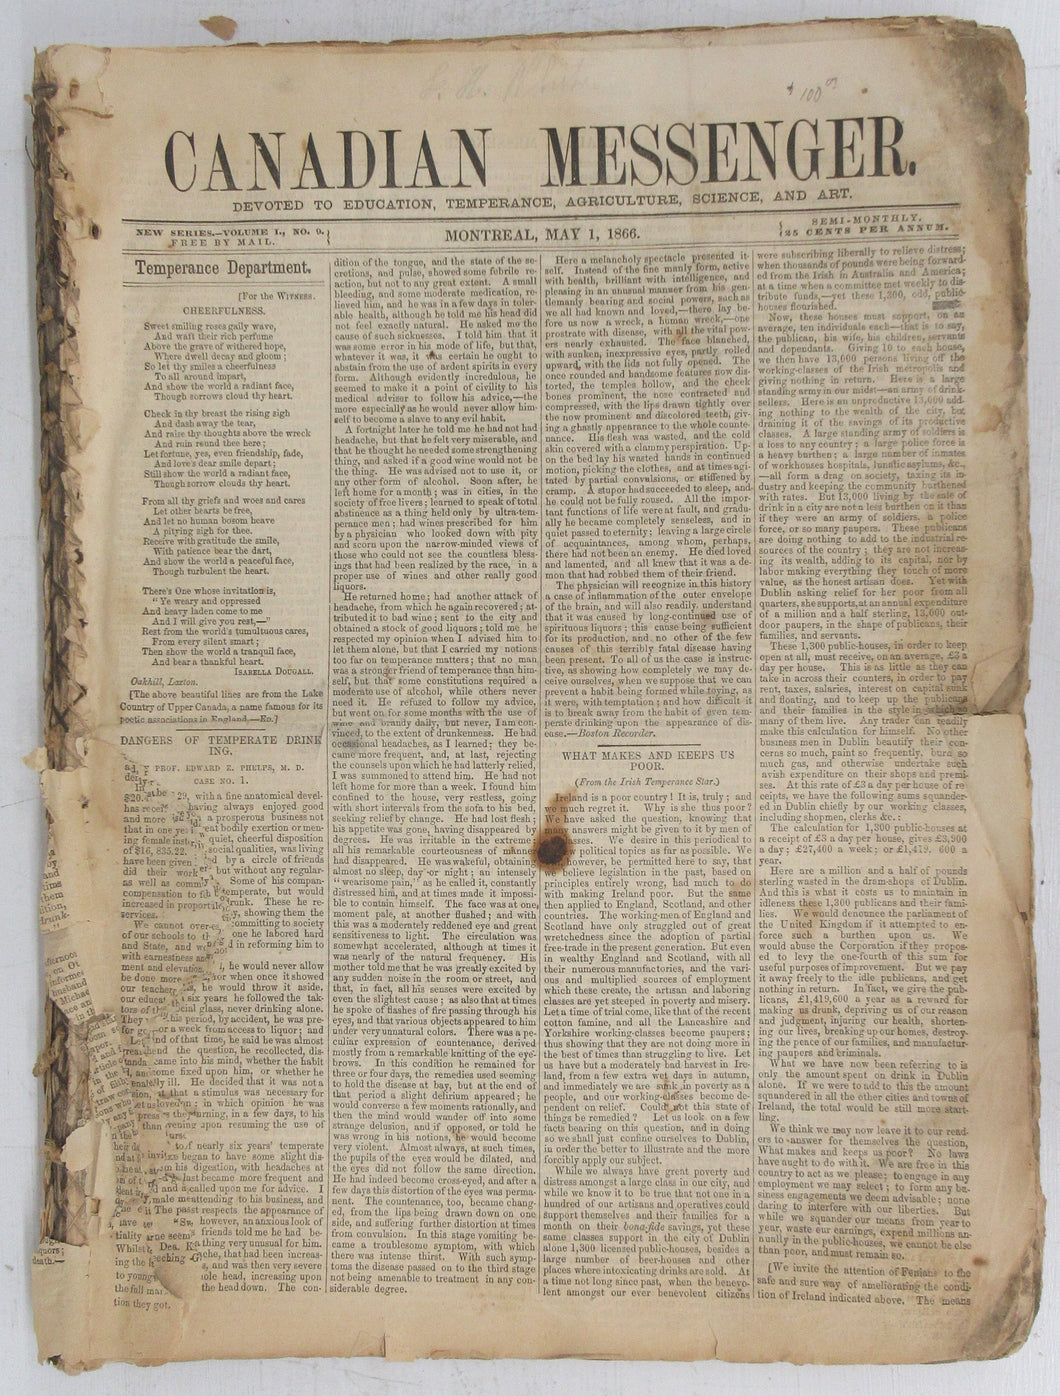 Canadian Messenger May 1, 1866 - March, 1867